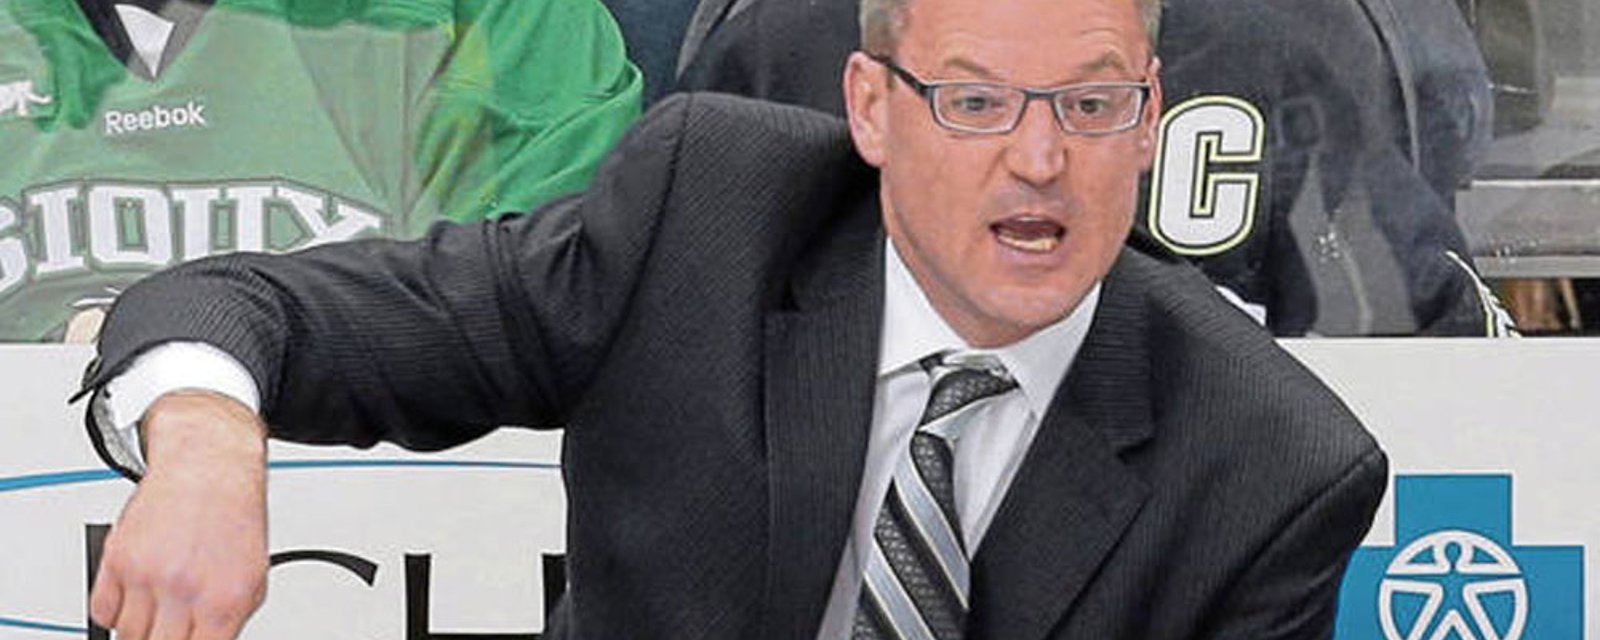 Dan Bylsma reportedly hired as NHL head coach